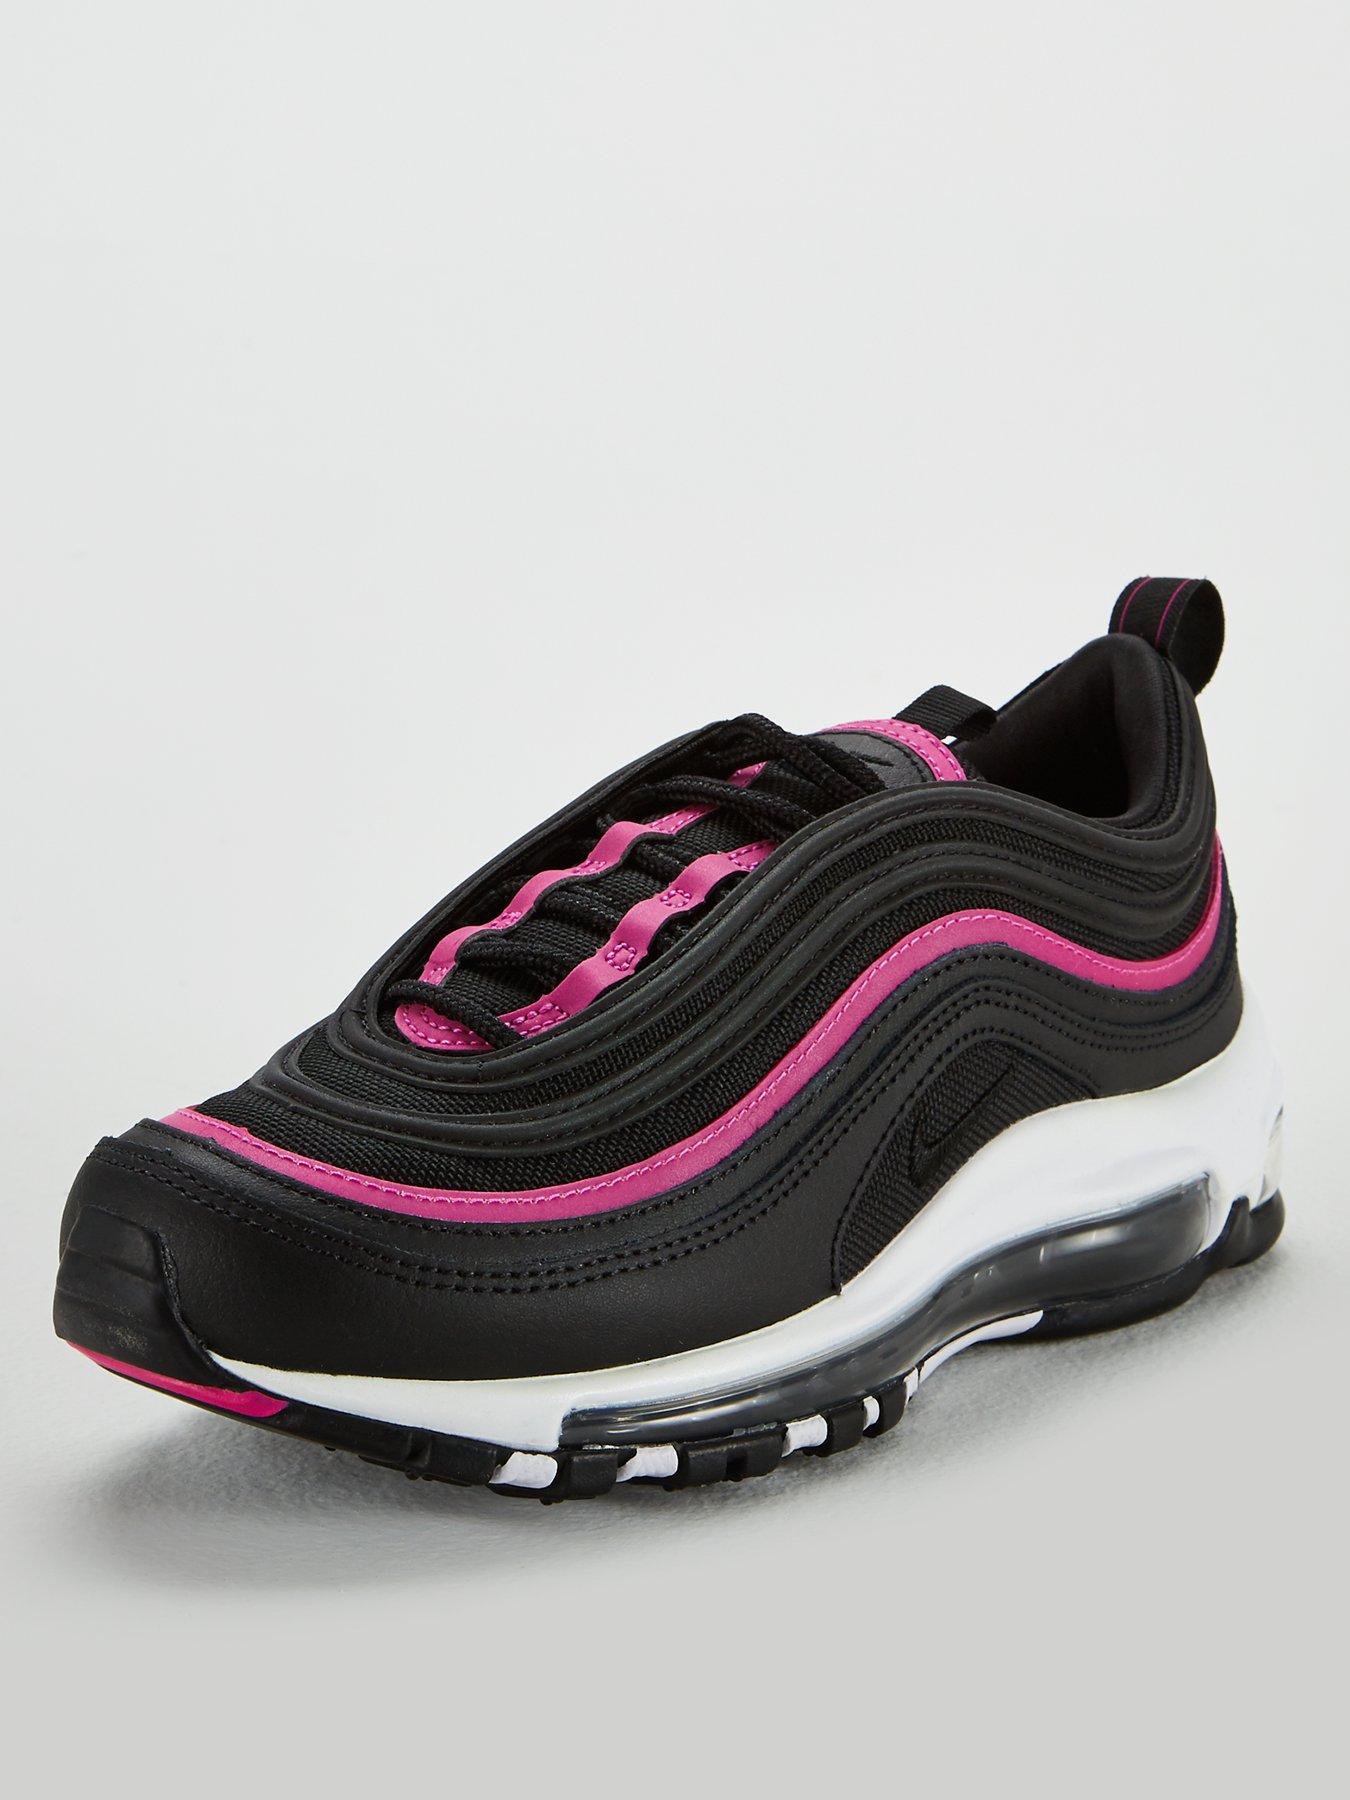 nike 97 black and pink